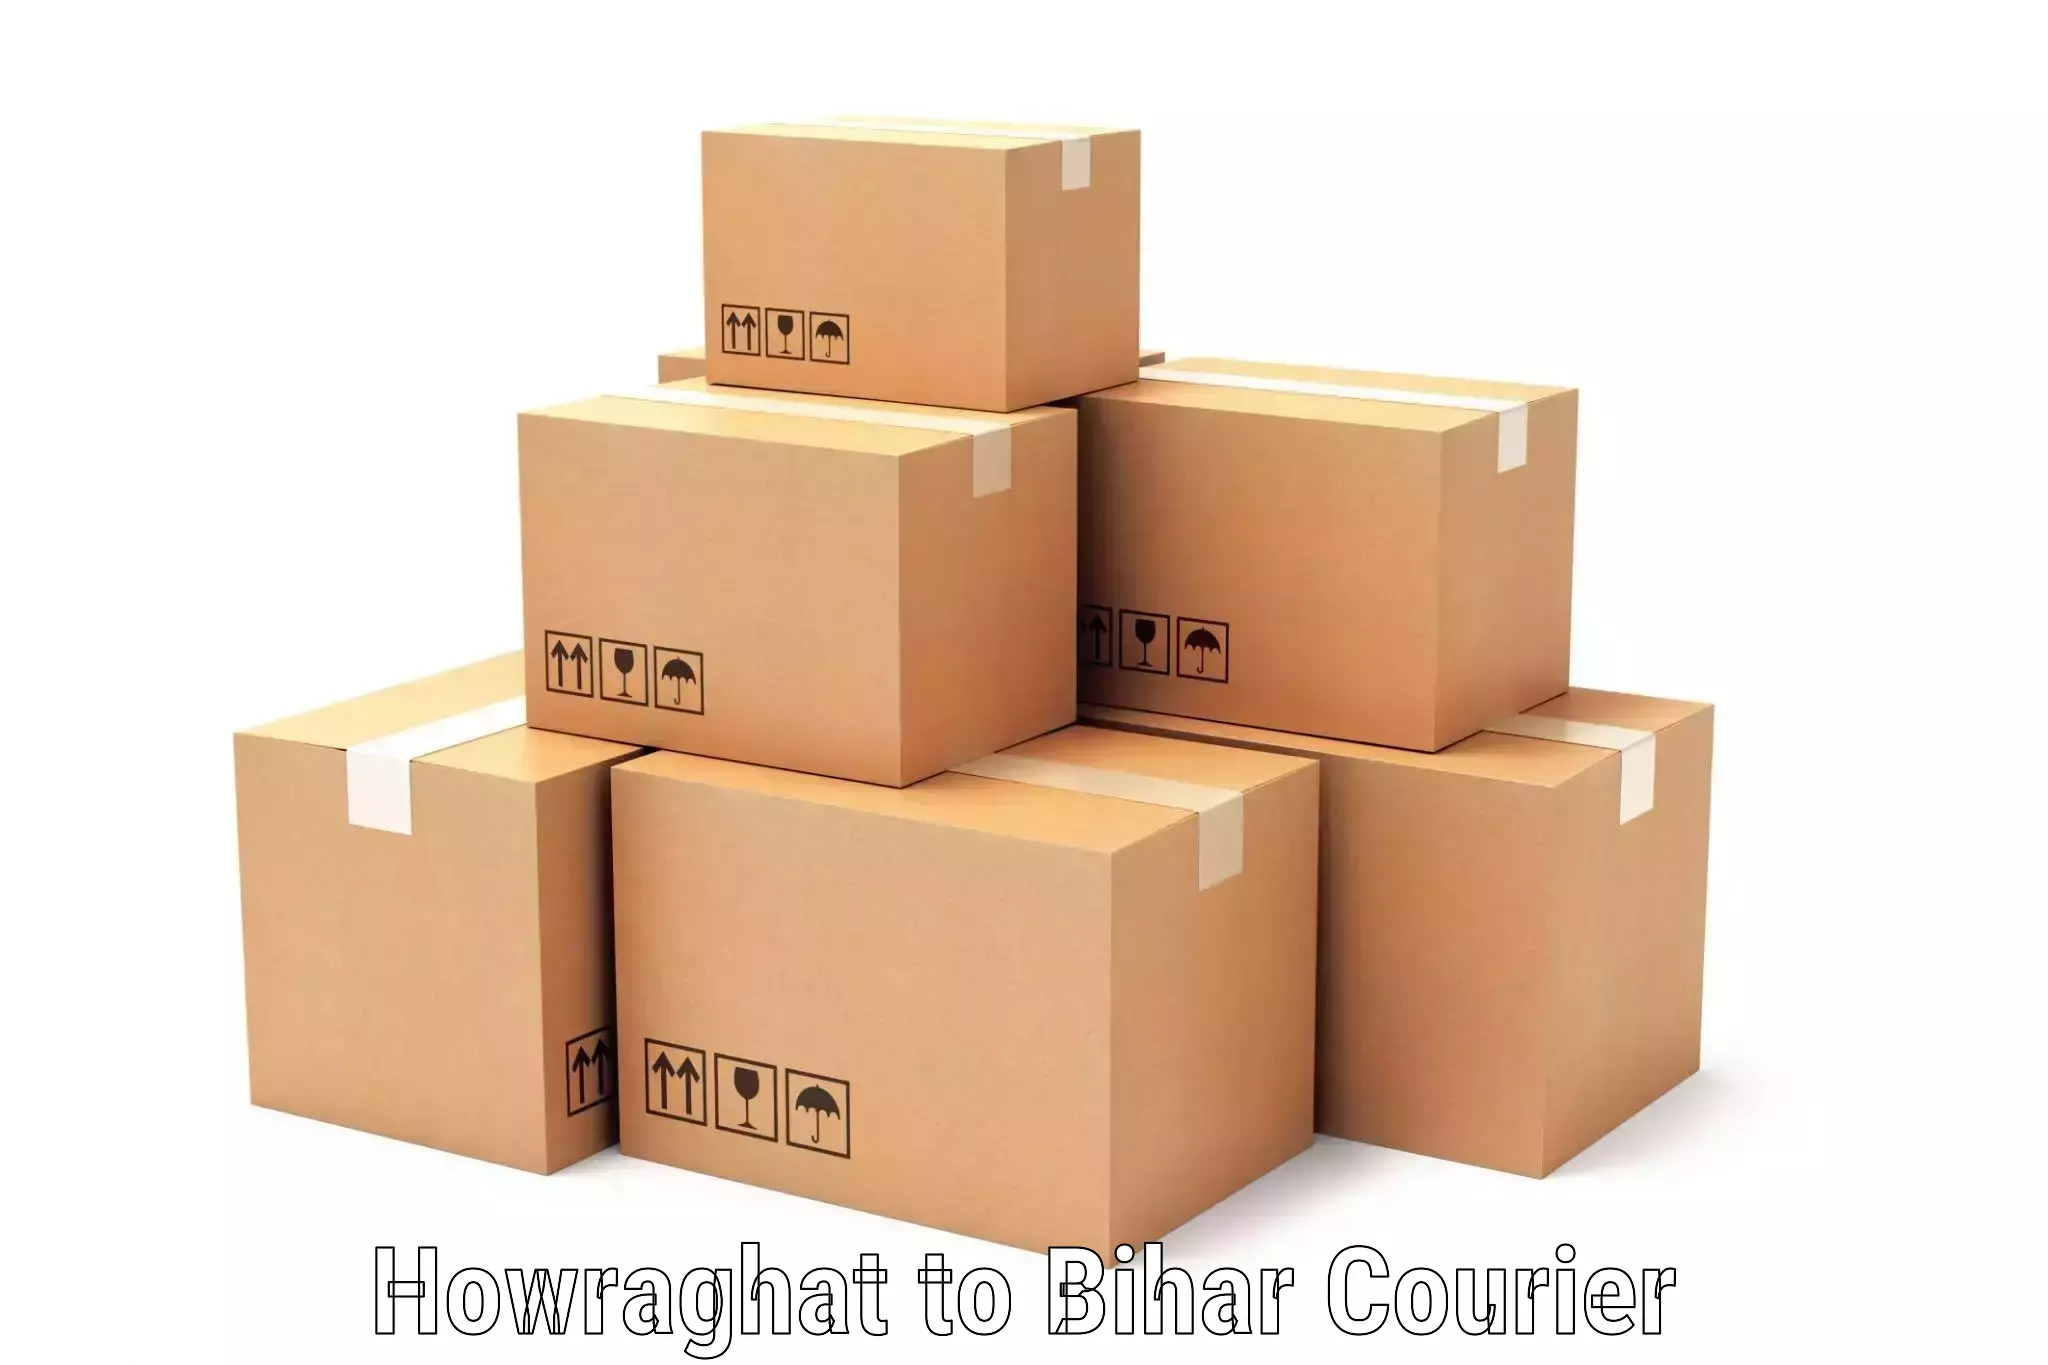 Large package courier Howraghat to Jhajha